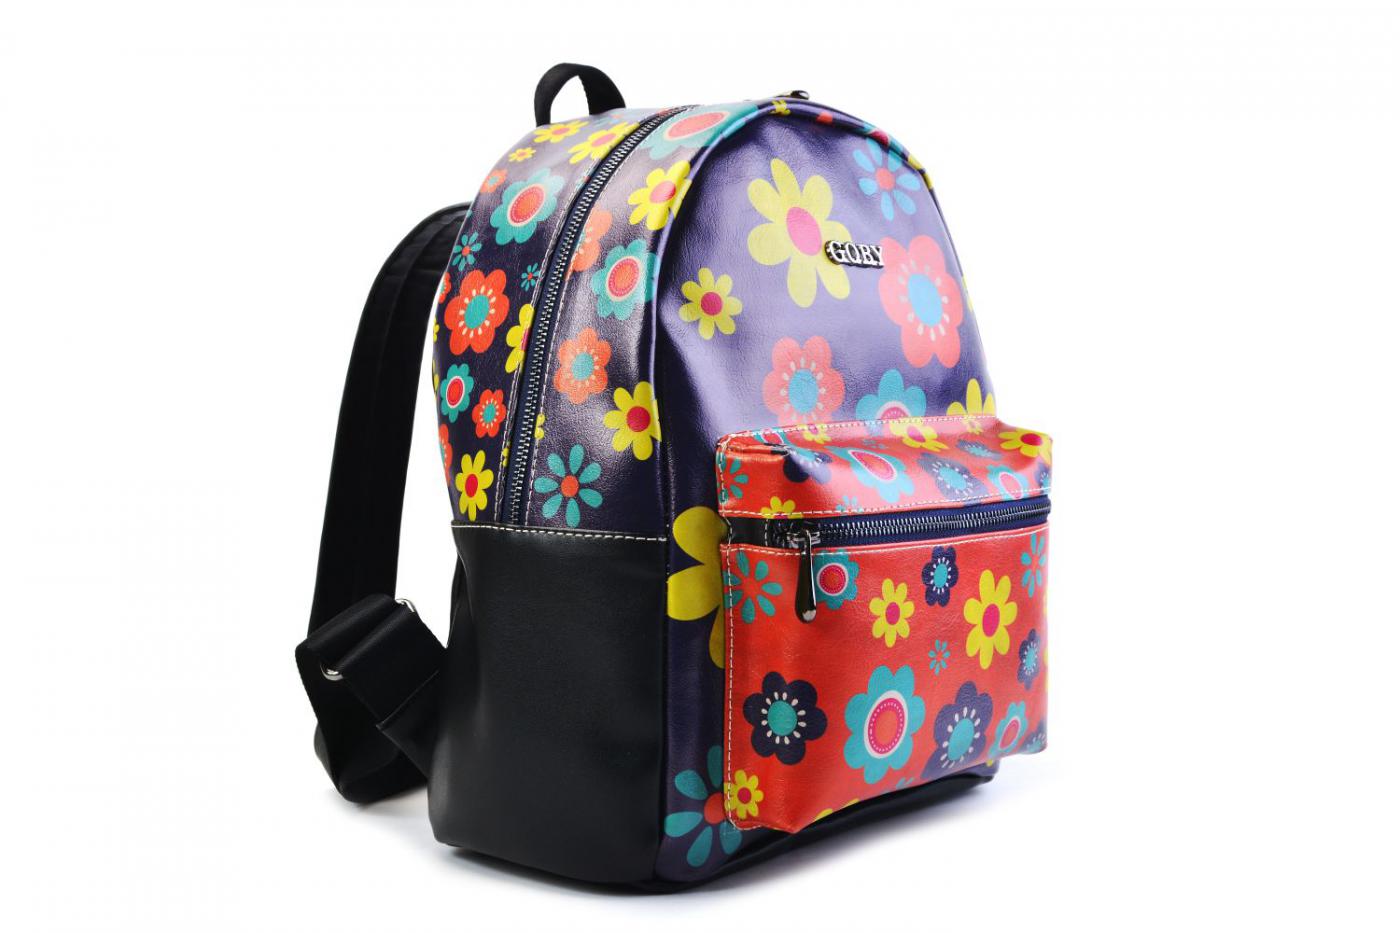 Backpack Bags CAN905